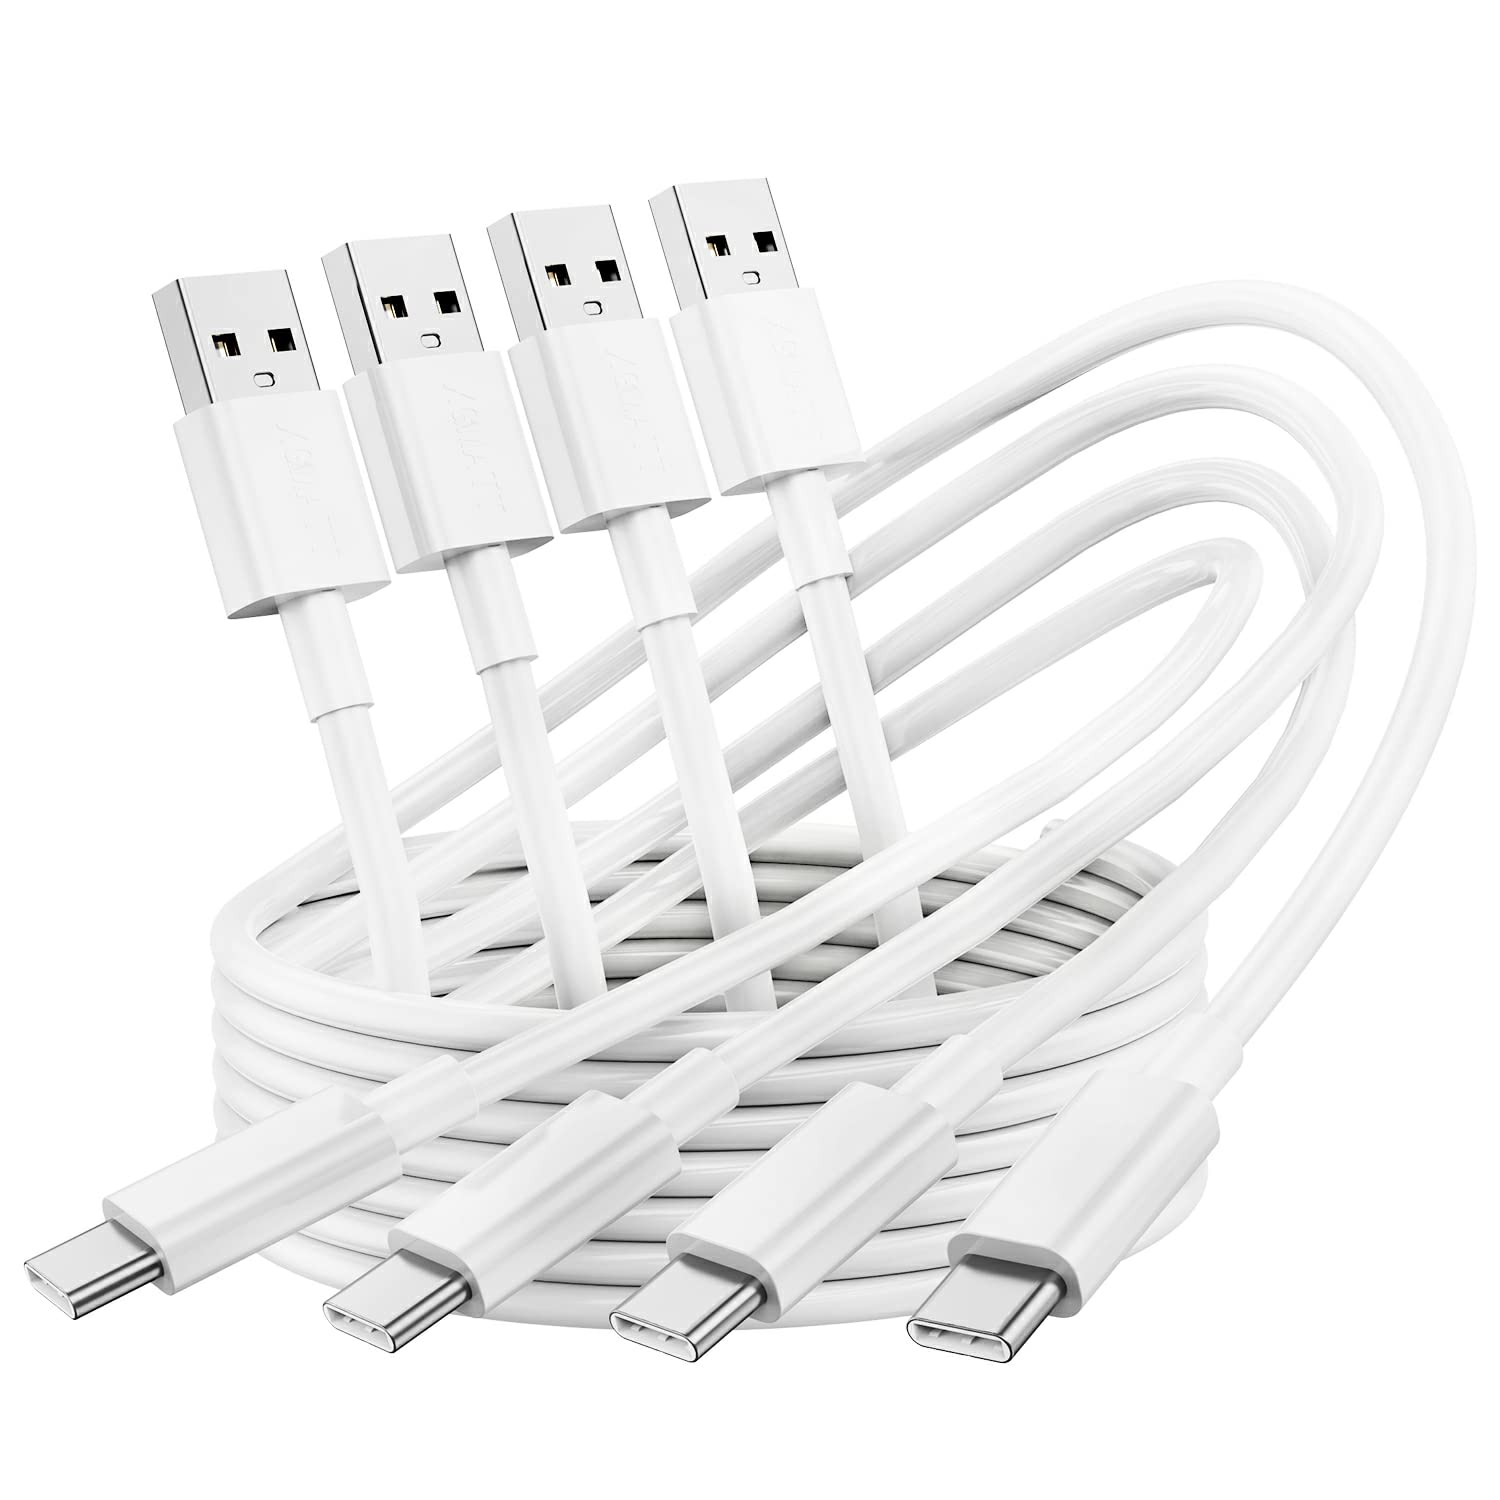 USB C Cable, [ 6.6FT 4 Pack ] Type C Fast Charging Cable USB C Fast Charger Cord Compatible for Samsung Galaxy S20/ S10 / S9 / S8,Note 10 9 8,Sony Xperia,Huawei P10 P9, Pixel,HTC 1